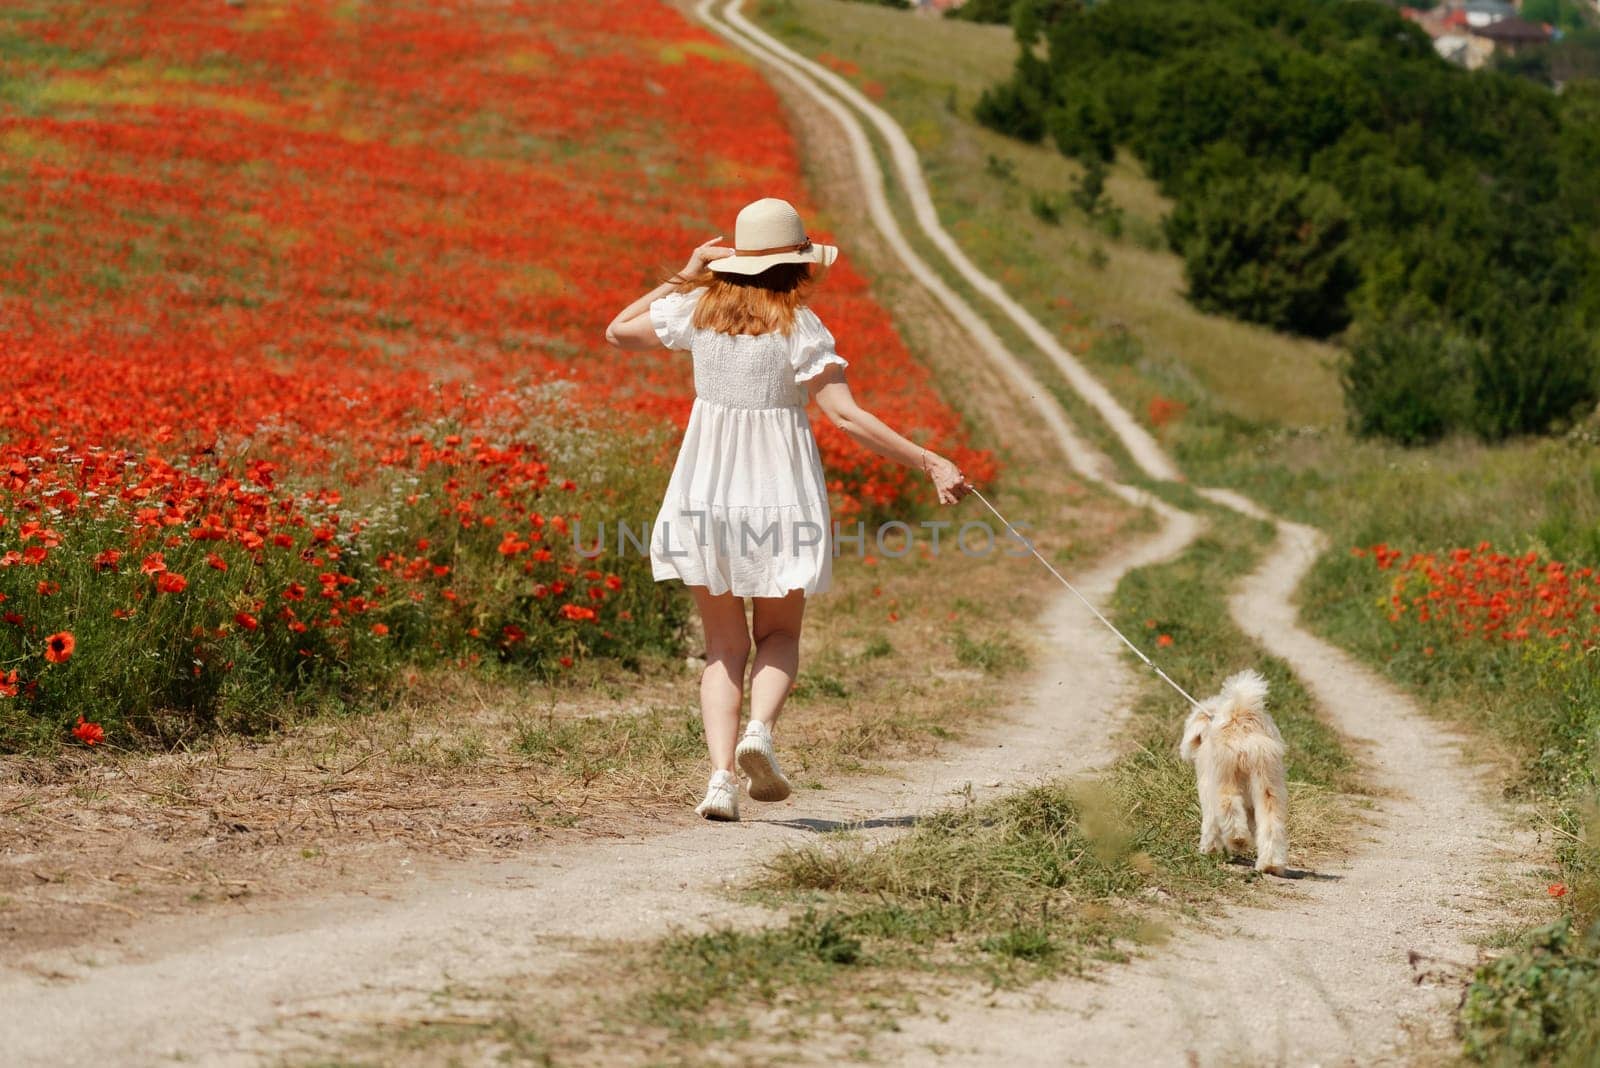 woman with dog. Happy woman walking with white dog the road along a blooming poppy field on a sunny day, She is wearing a white dress and a hat. On a walk with dog by Matiunina